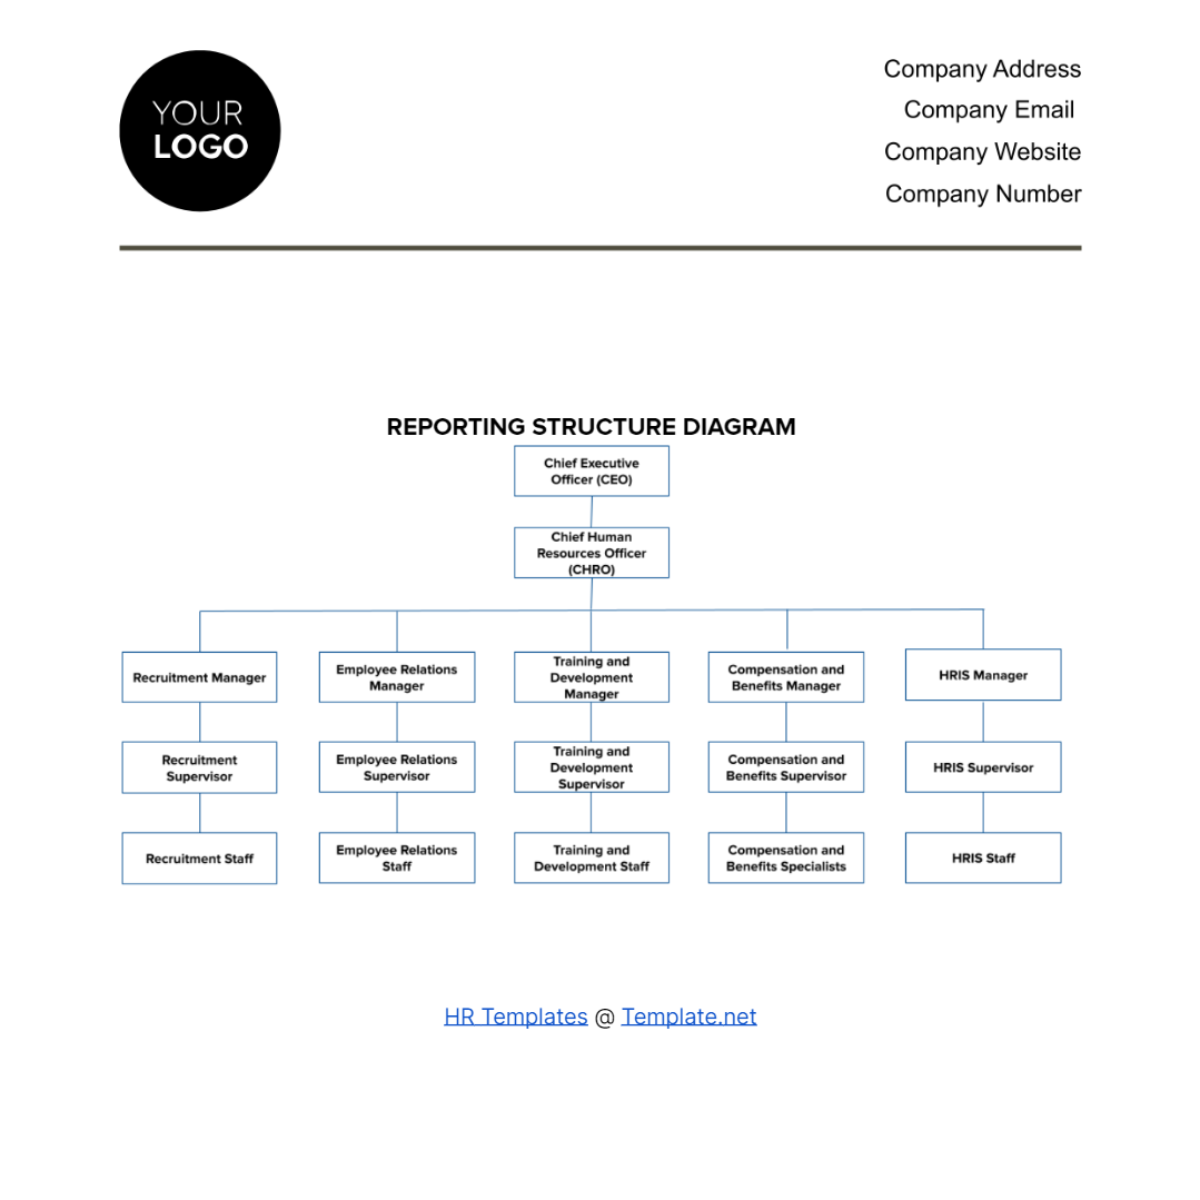 Reporting Structure Diagram HR Template